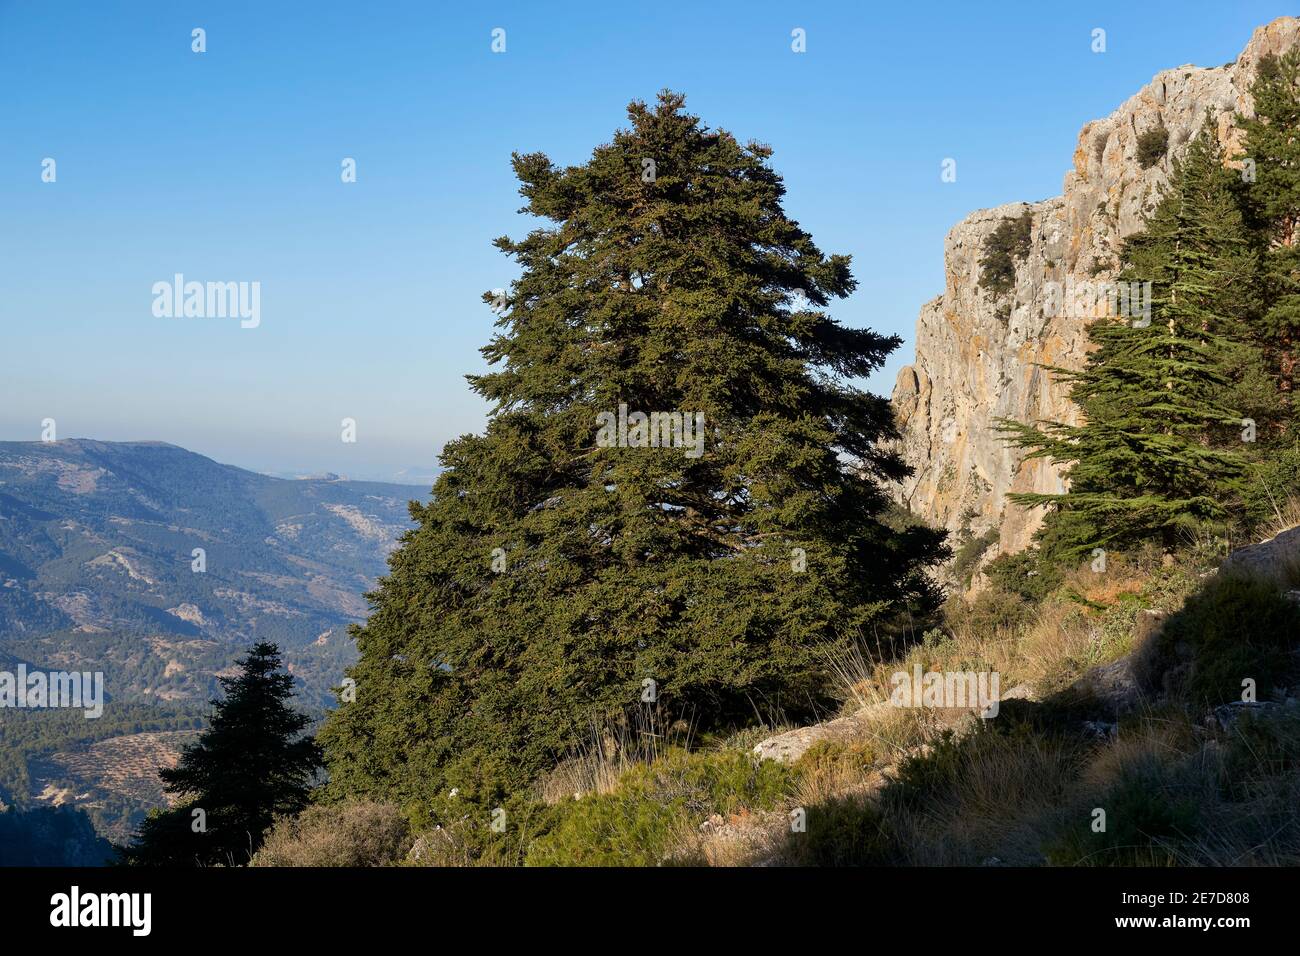 Pinsapos forest (Abies Pinsapo) in the Yunquera fir forest of the Sierra de las Nieves national park in Malaga. Andalusía, Spain Stock Photo